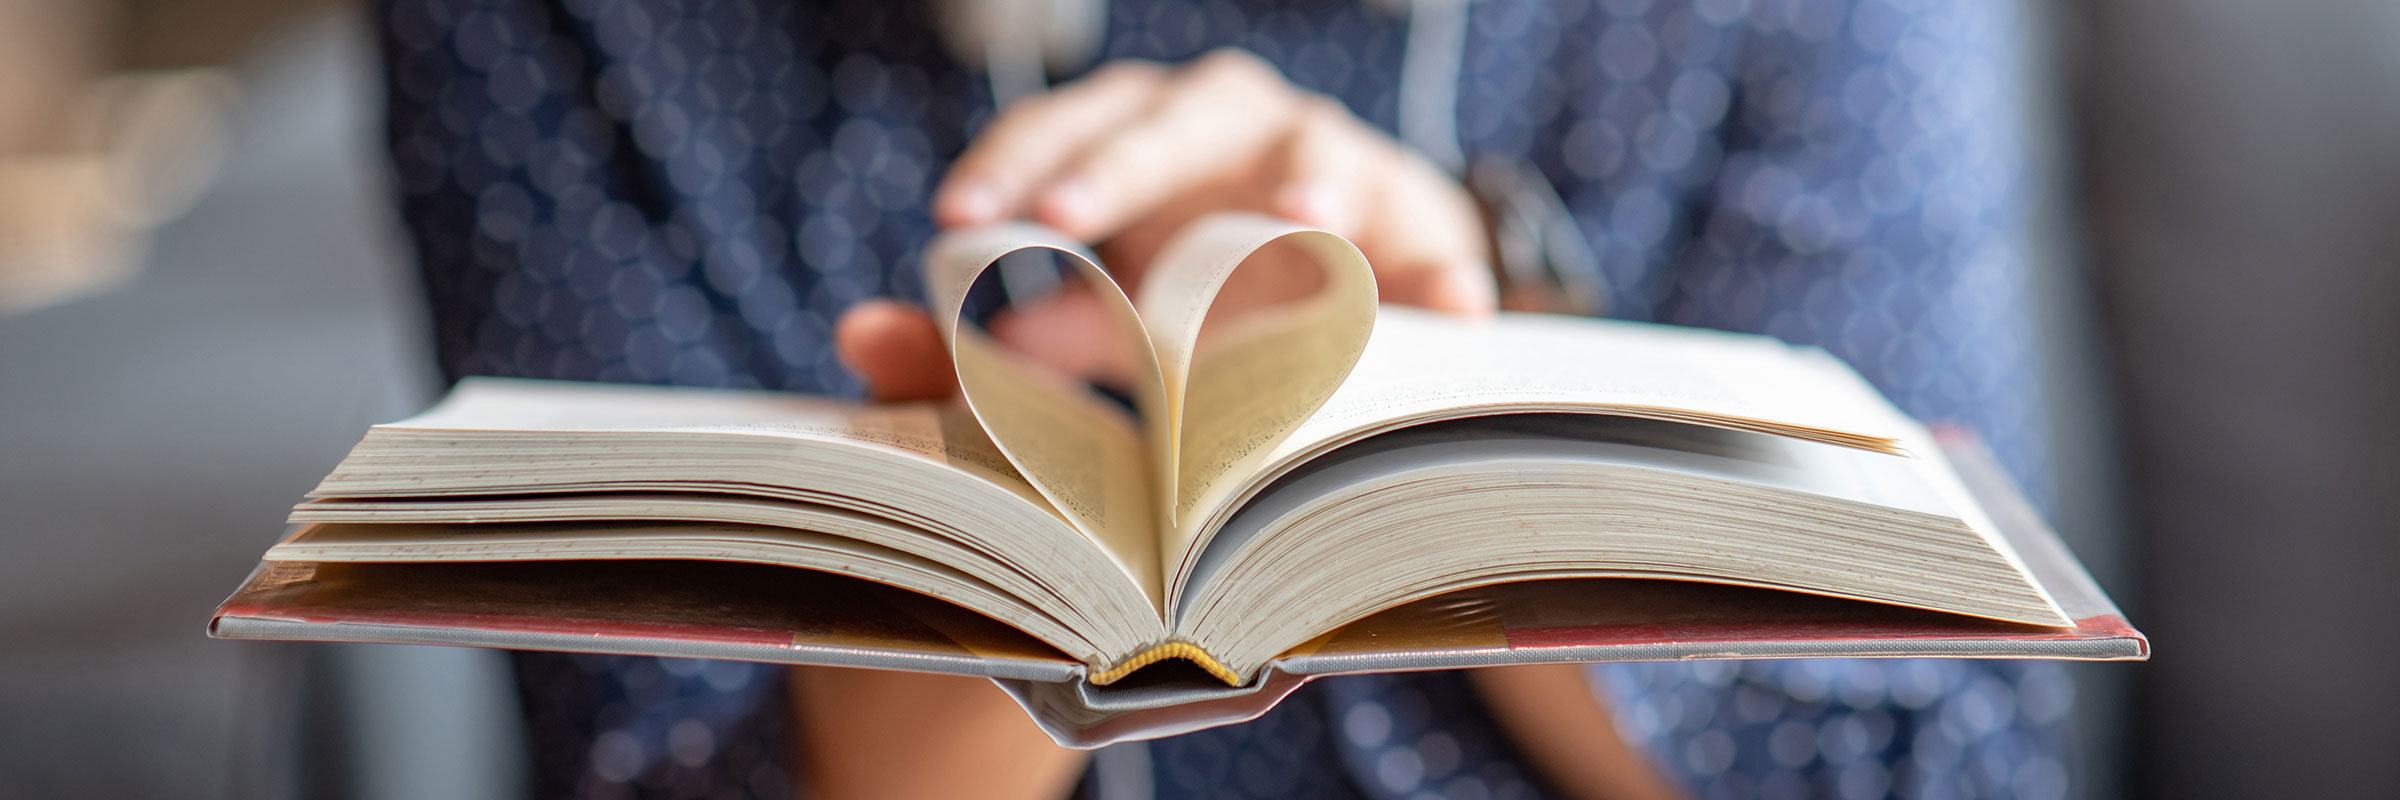 Hands holding book with middle pages curled into heart shape